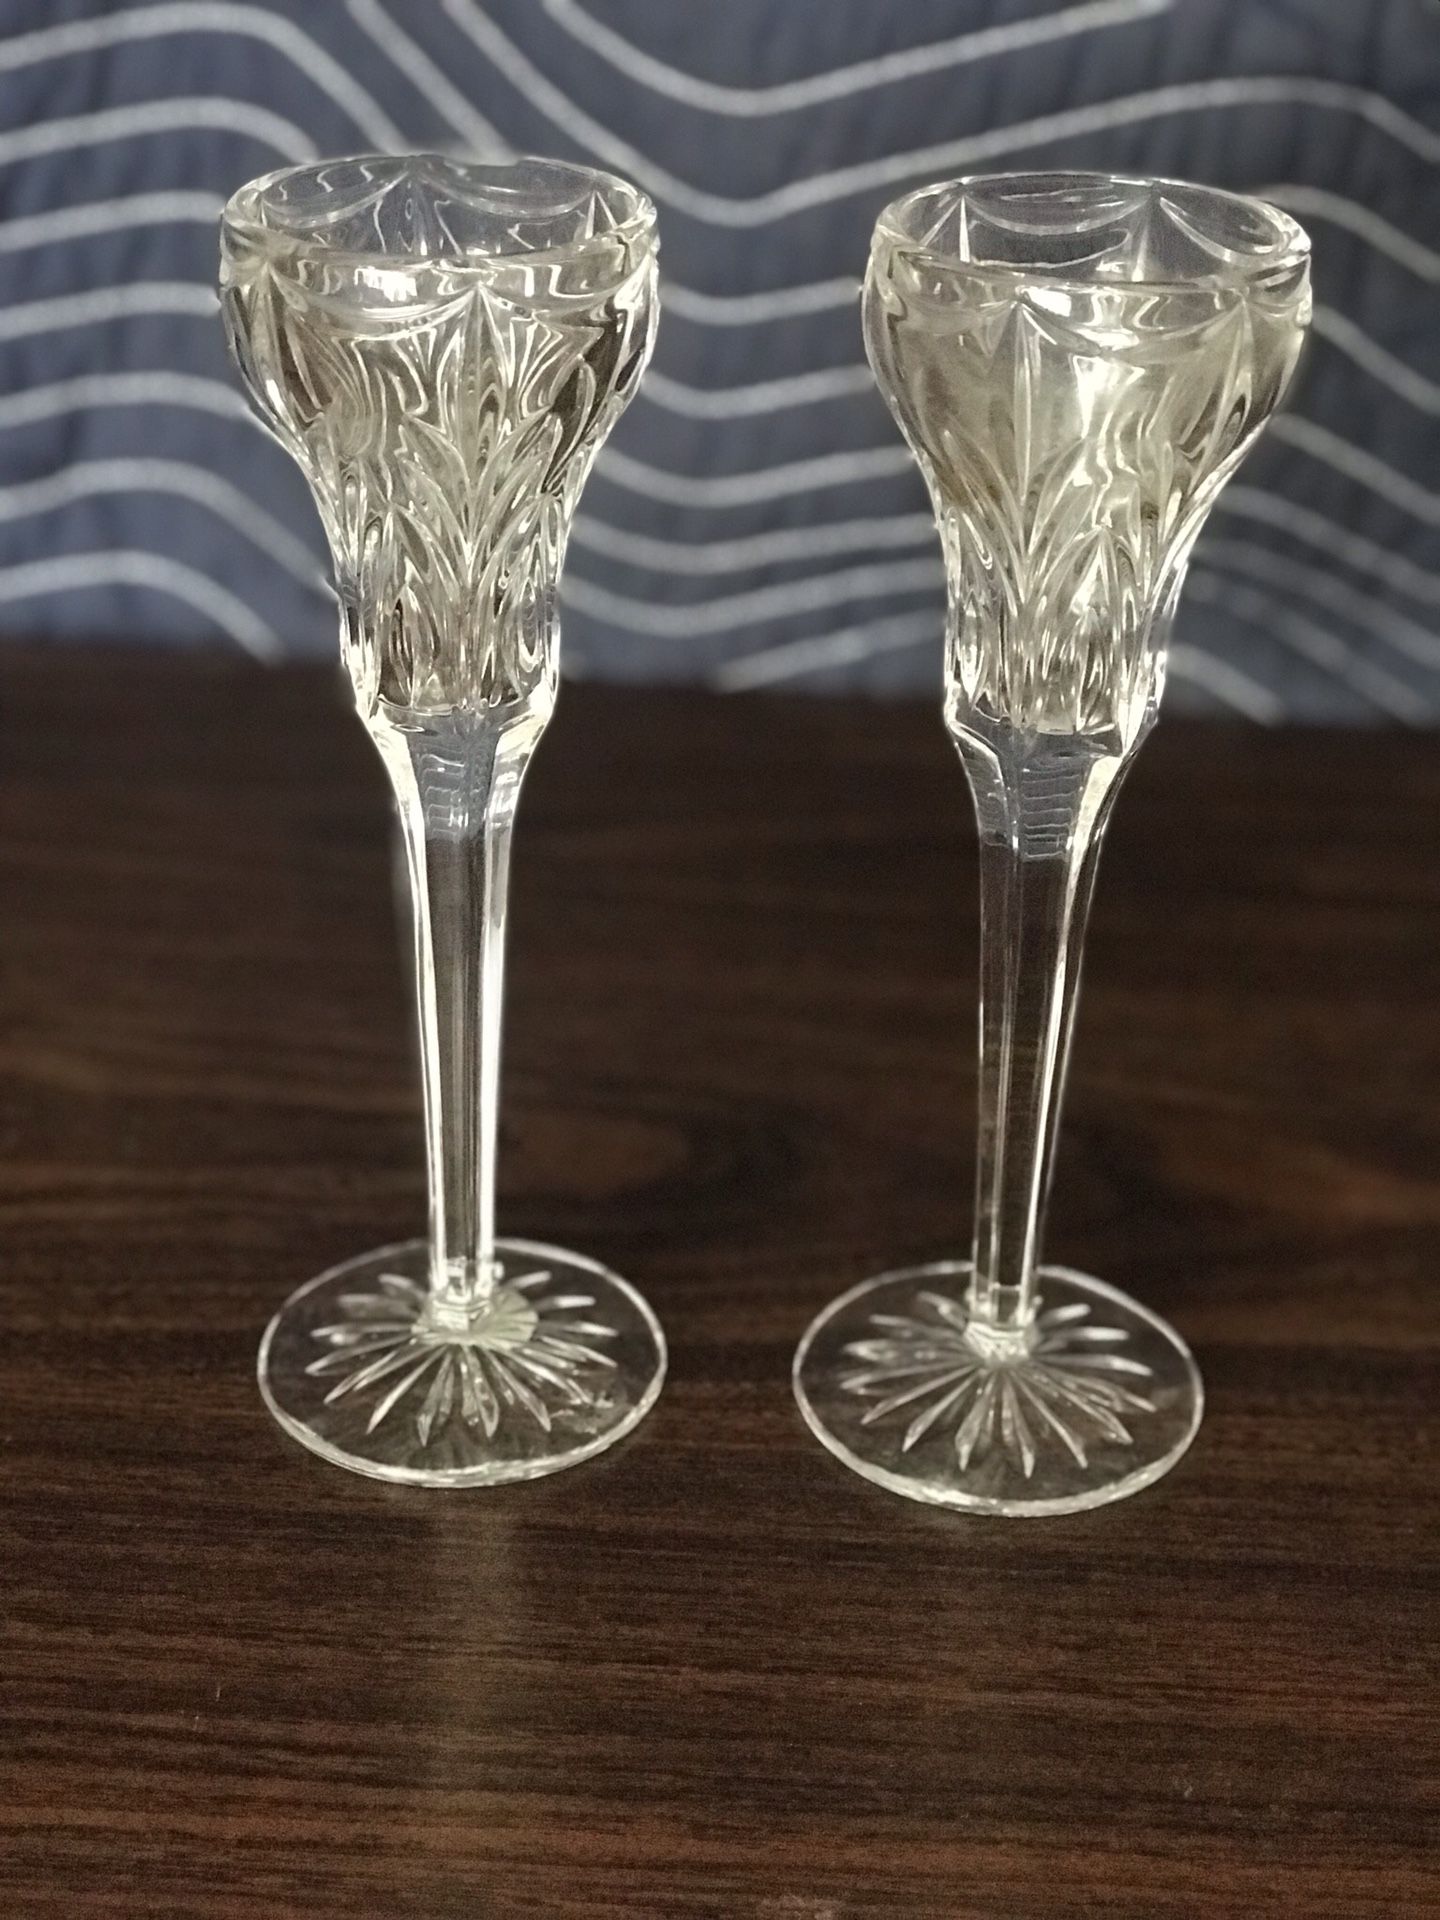 Waterford Crystal candle holders